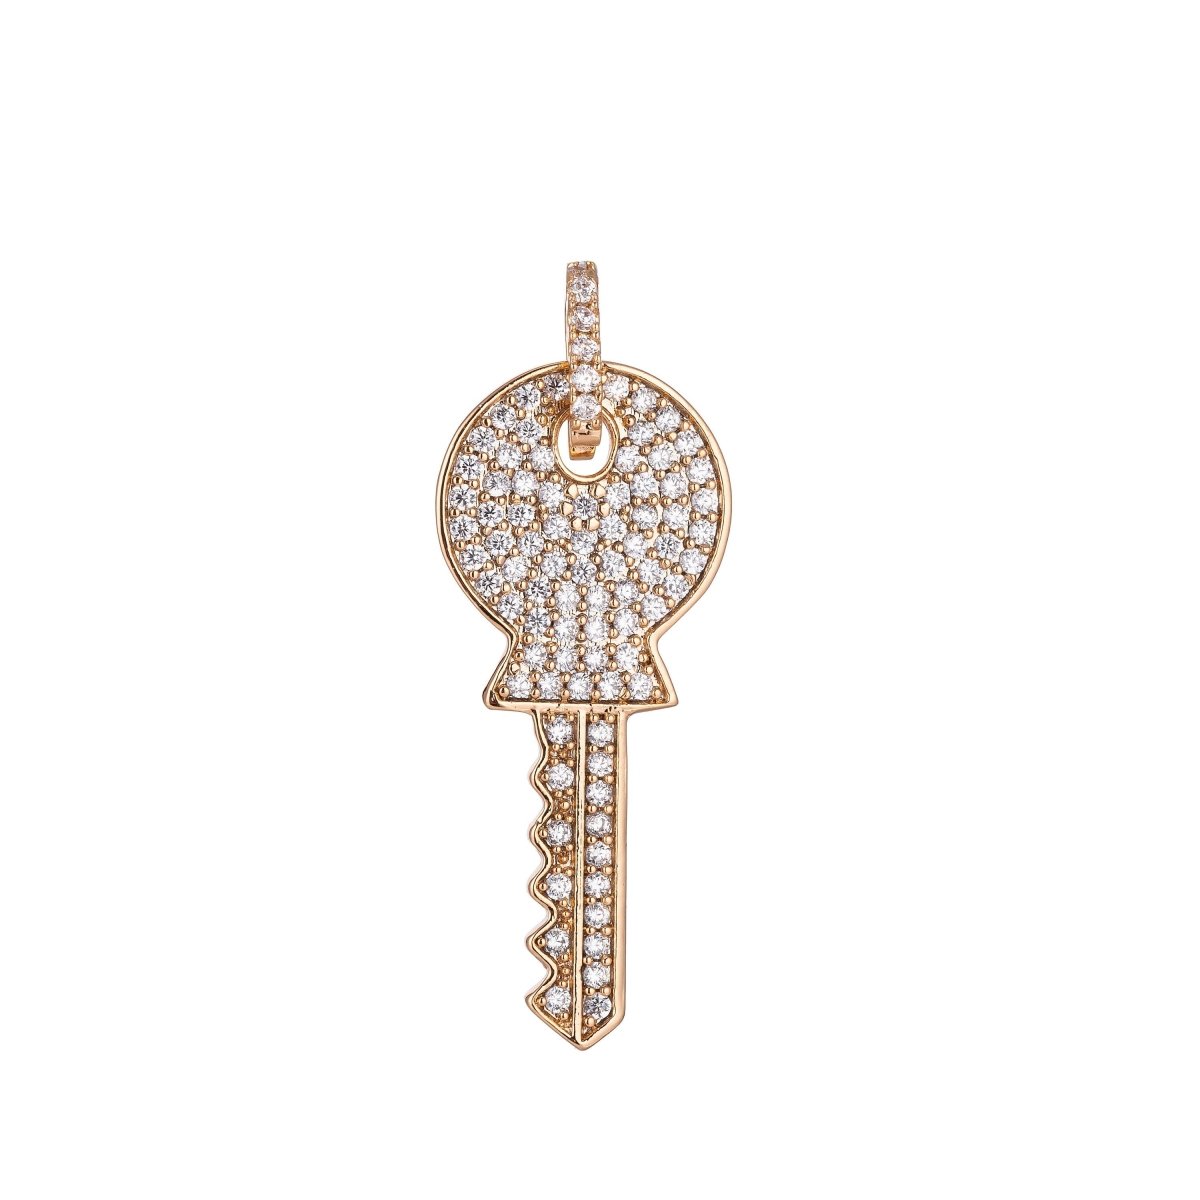 Gold Key Charm, Micro Pave CZ Charm, 18K Gold Filled Pendant Dainty Diamond Key Necklace Charm for Jewelry Making H-892 - DLUXCA